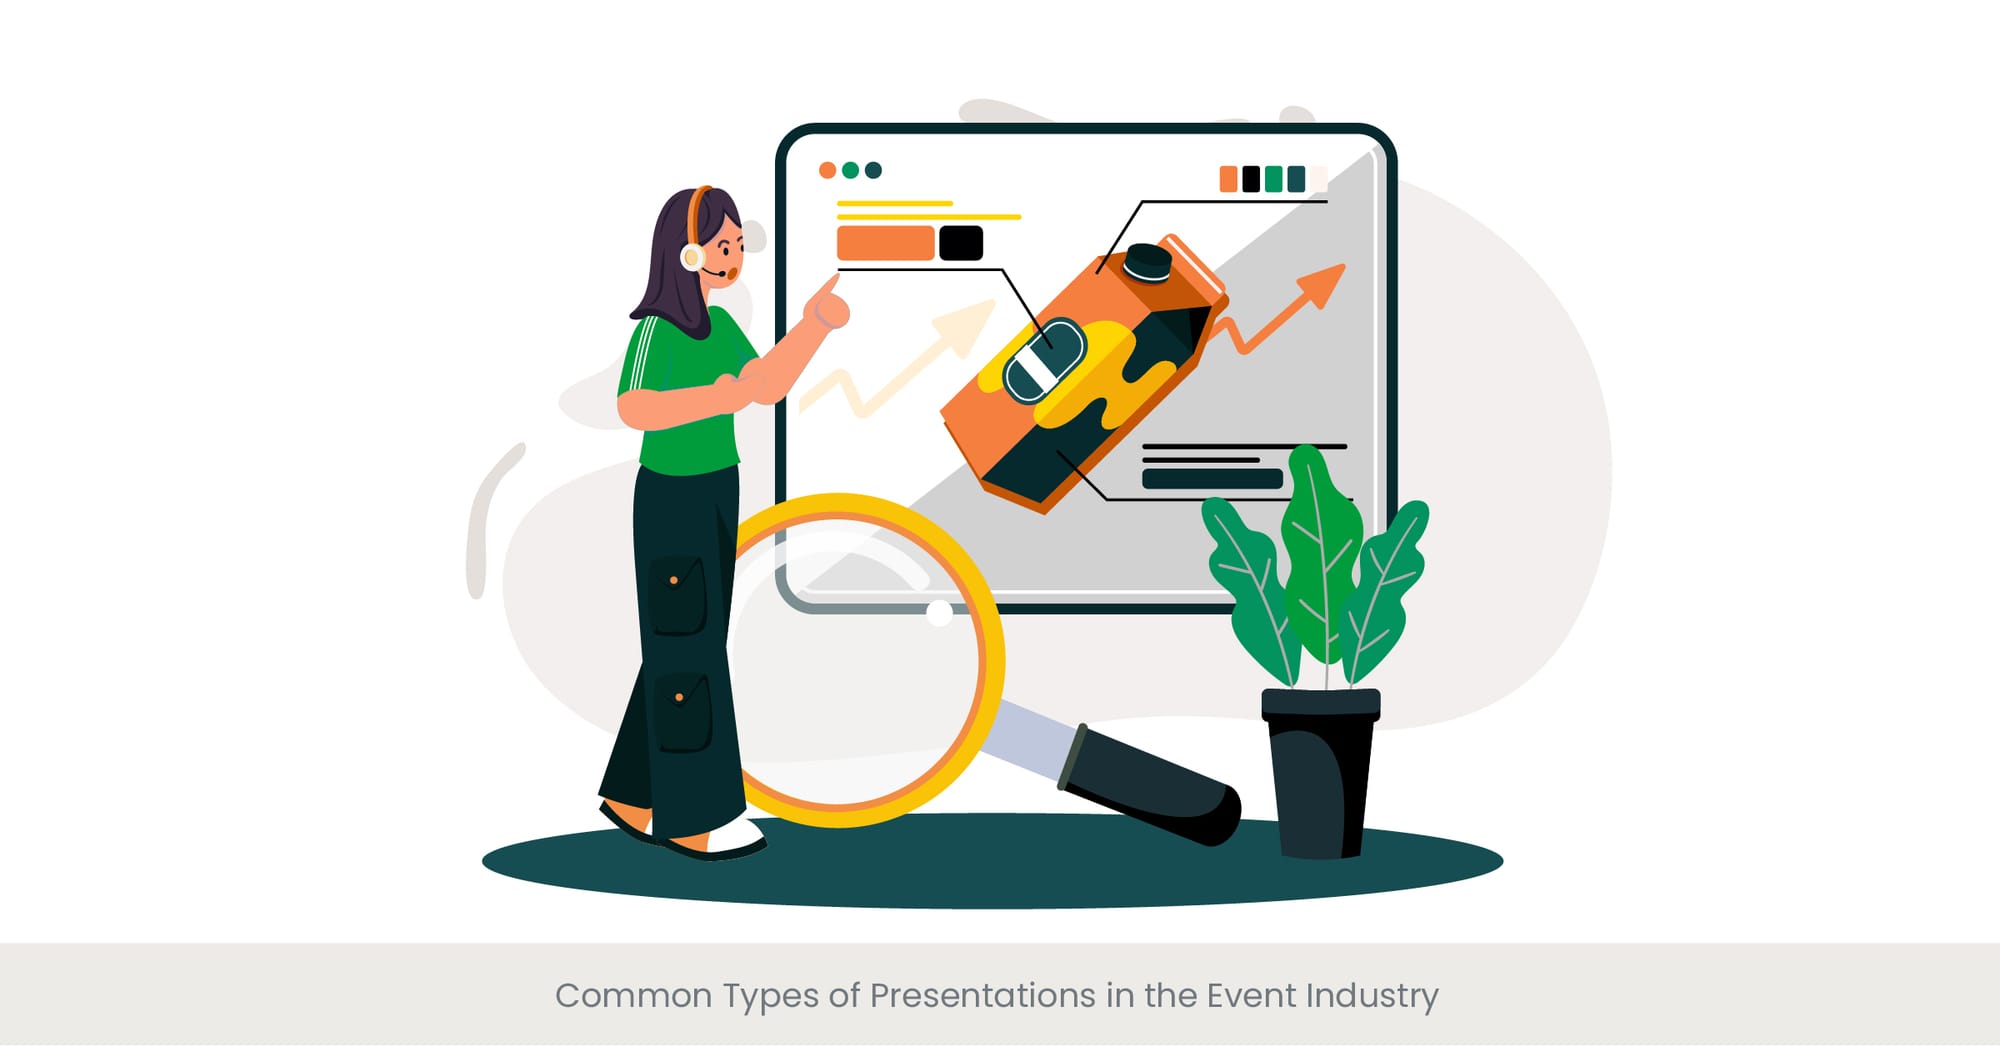 Common Types of Presentations in the Event Industry